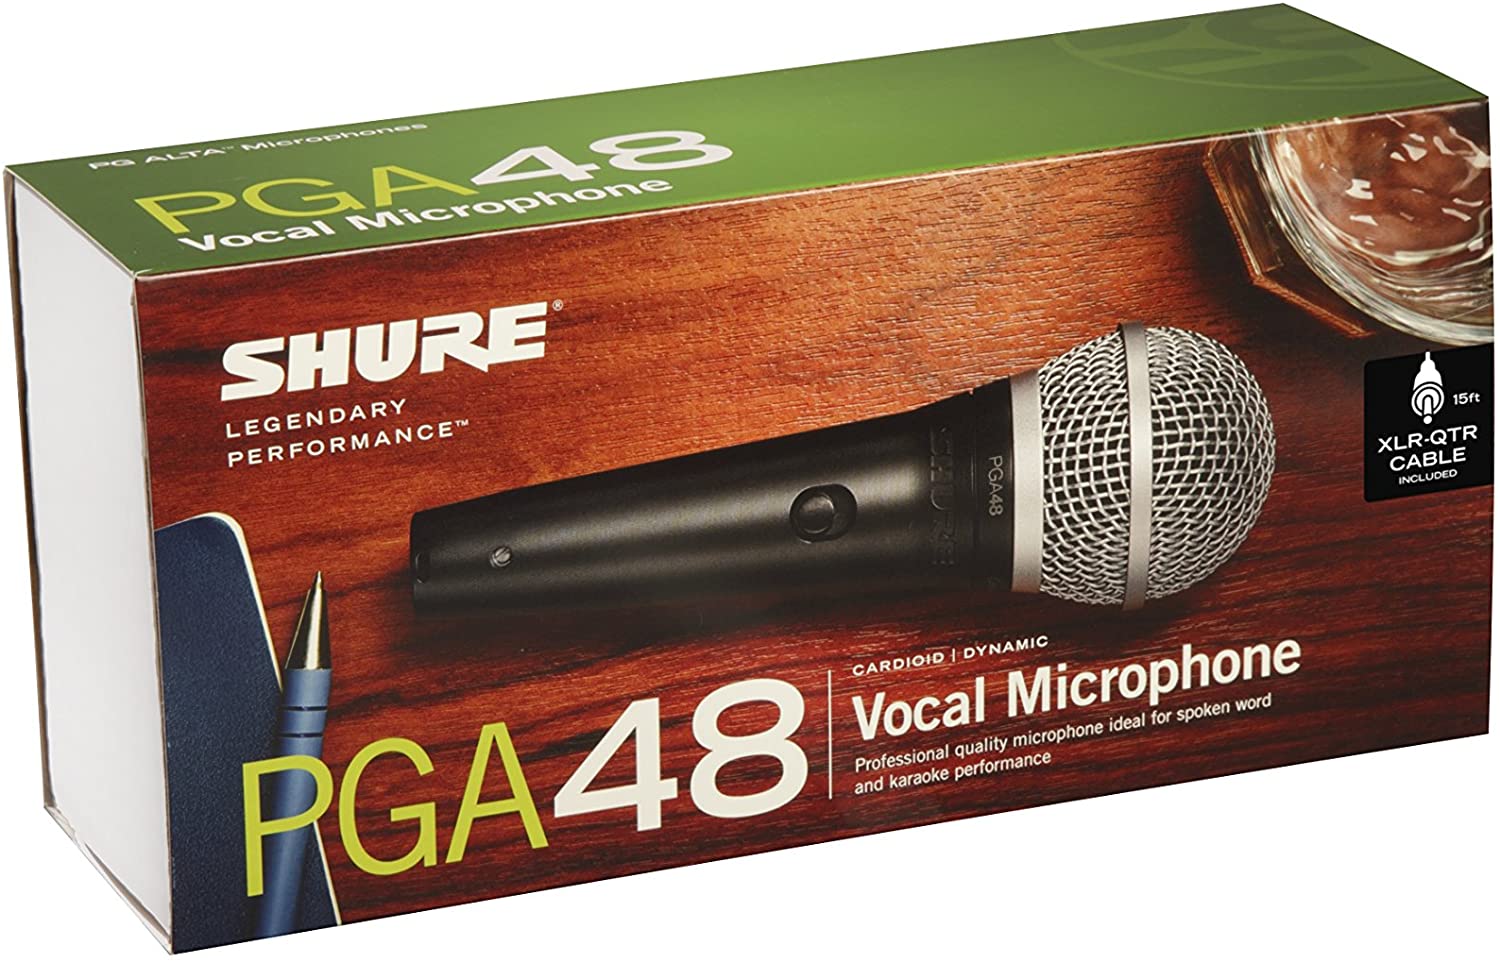 Shure PGA48-QTR Cardioid Dynamic Vocal Microphone with 15' XLR-QTR Cable 5.00 x 10.00 x 3.50